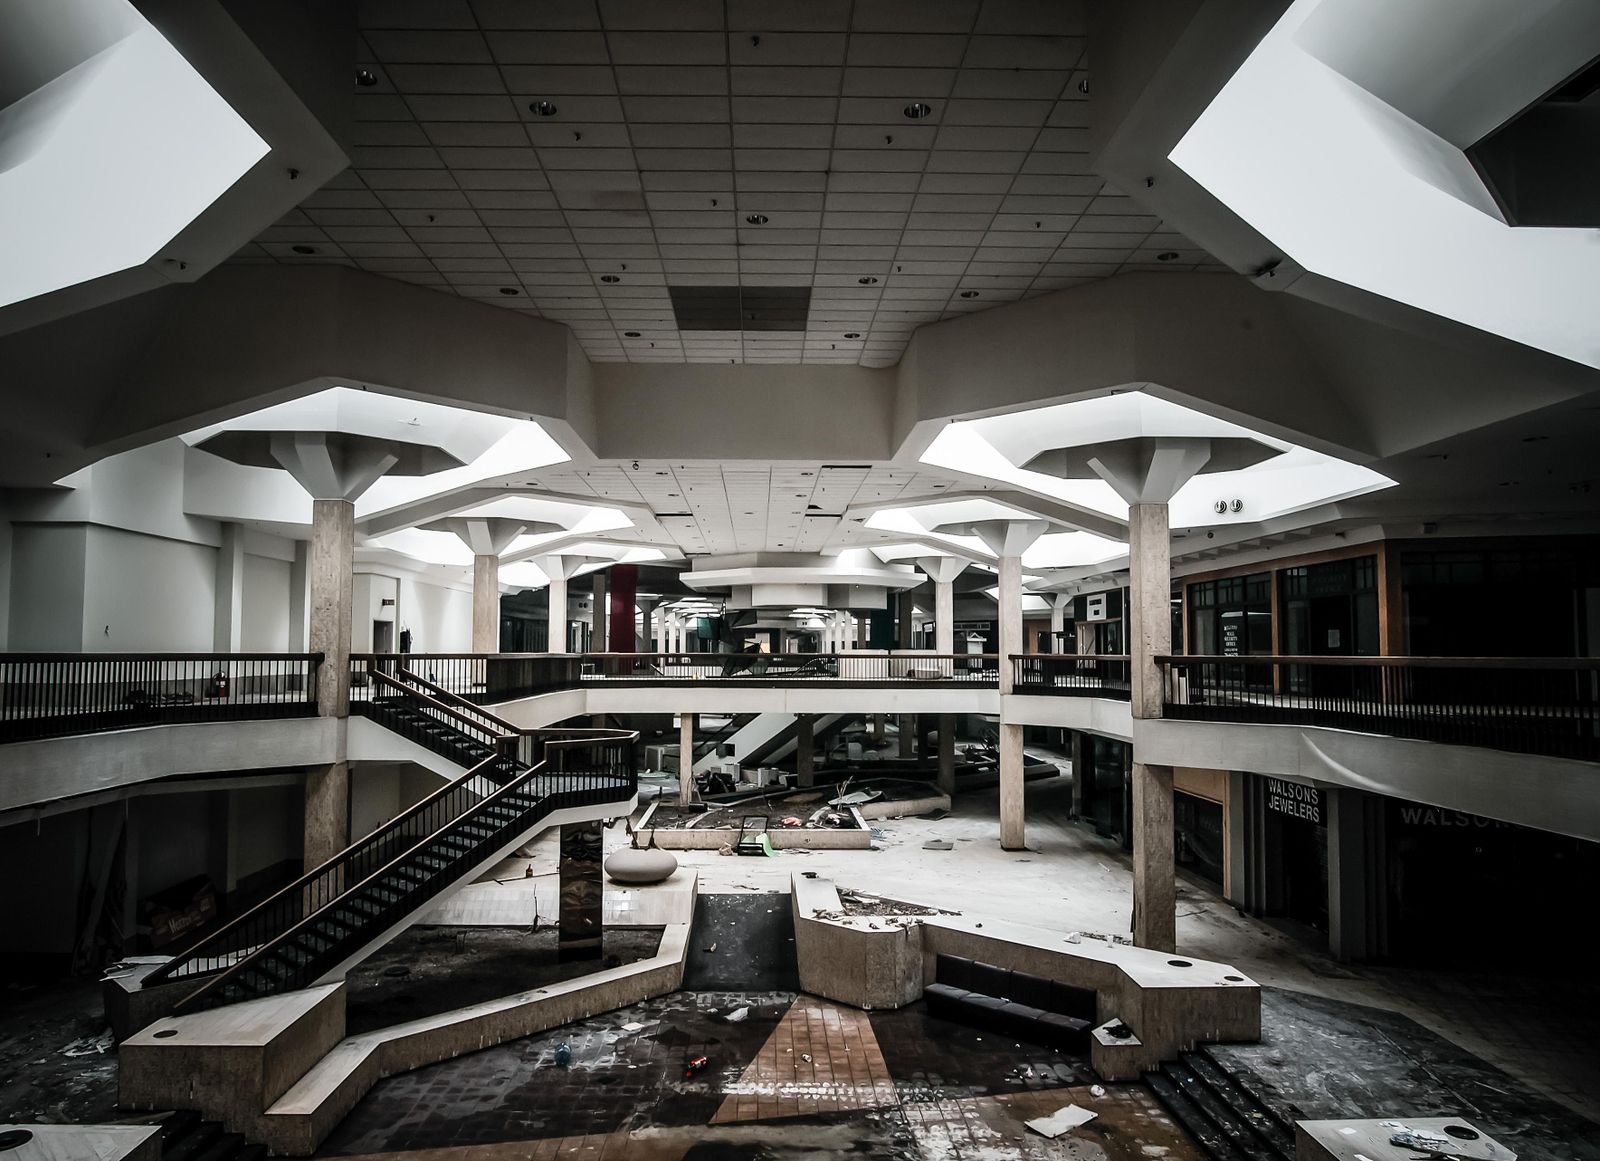 Timeline of New Jersey's American Dream megamall and how it got built